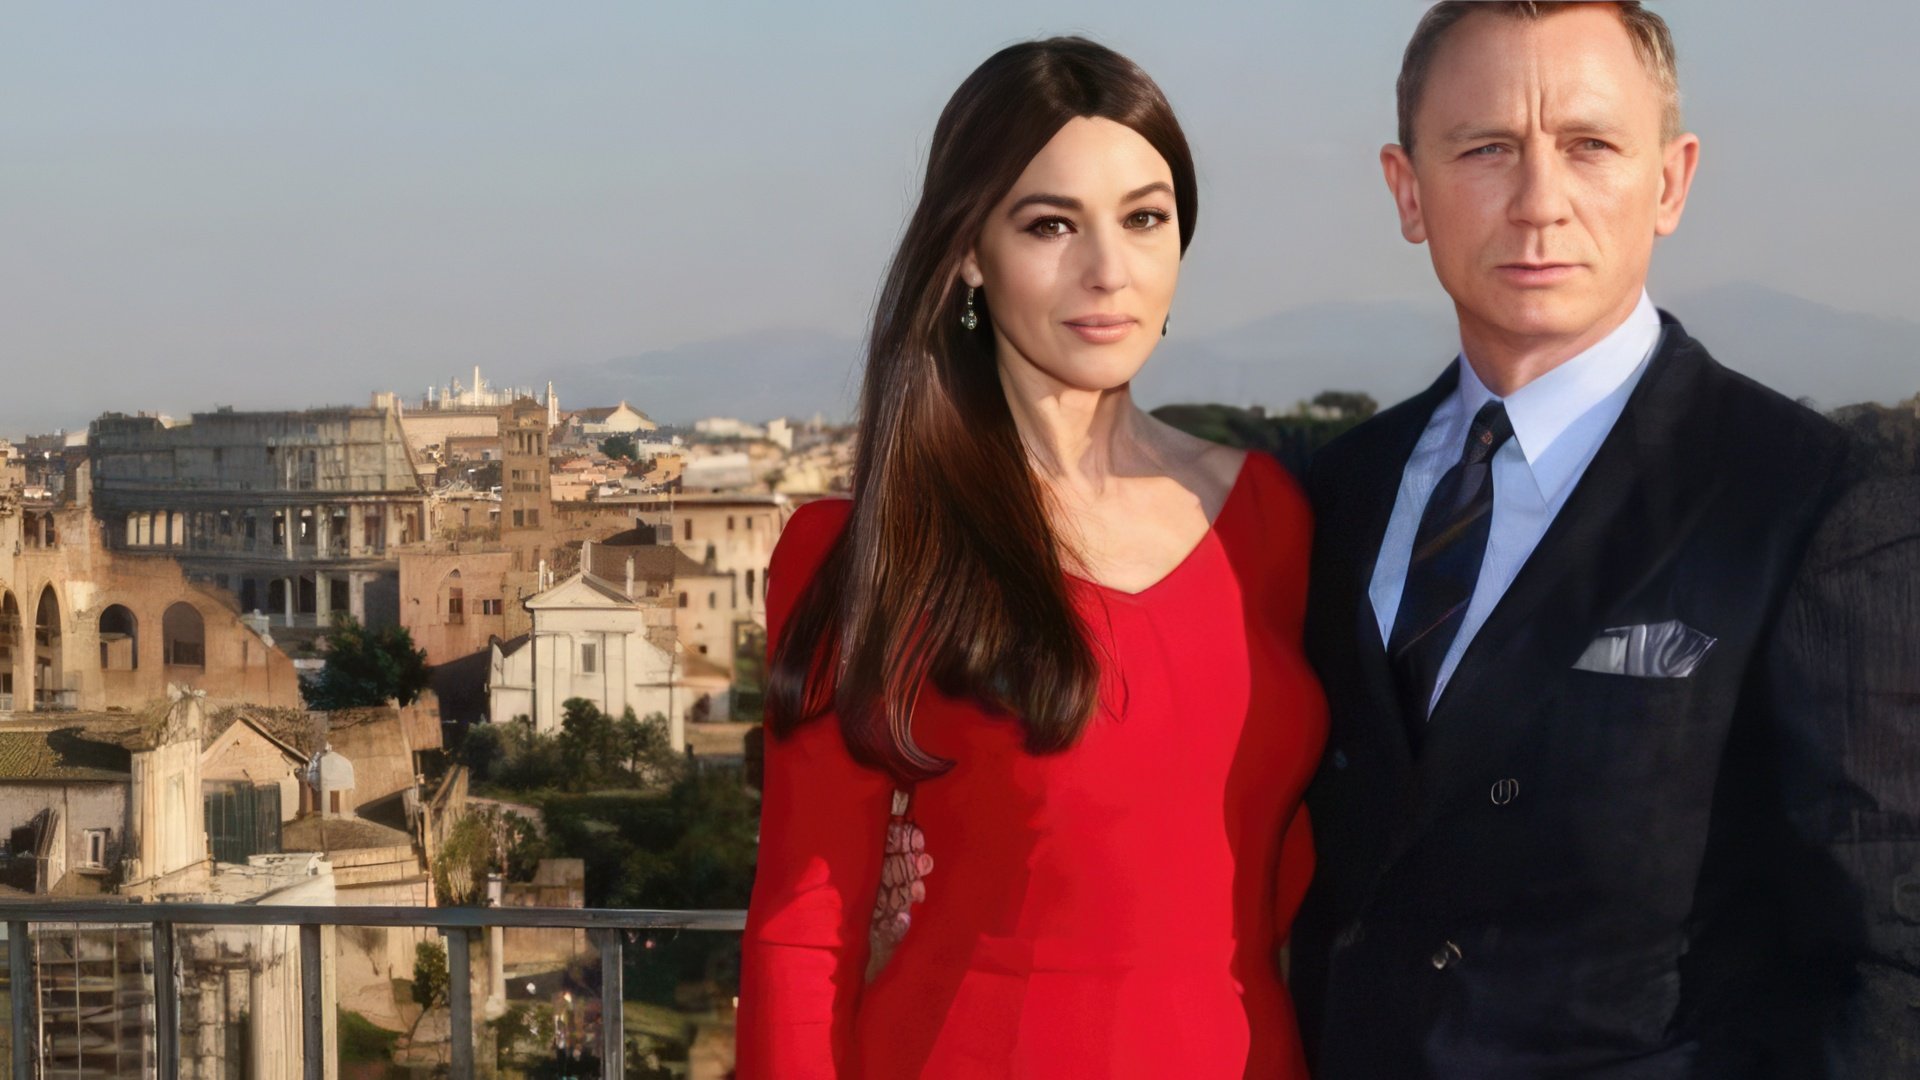 In 2015 Monica Bellucci became the new girlfriend of James Bond